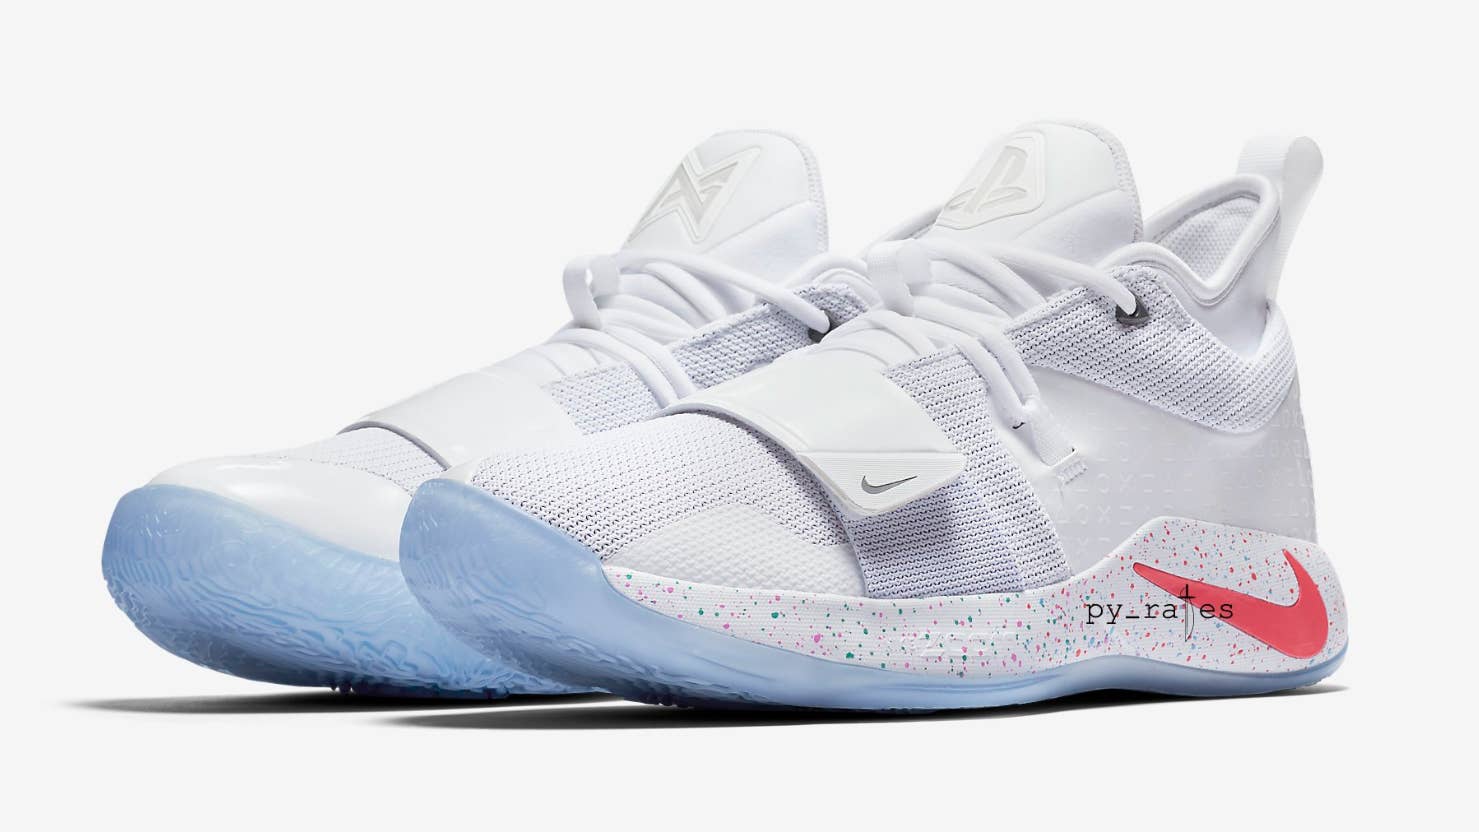 Nike PG 2 Paul George SIgnature Shoes - First Look + Release Info